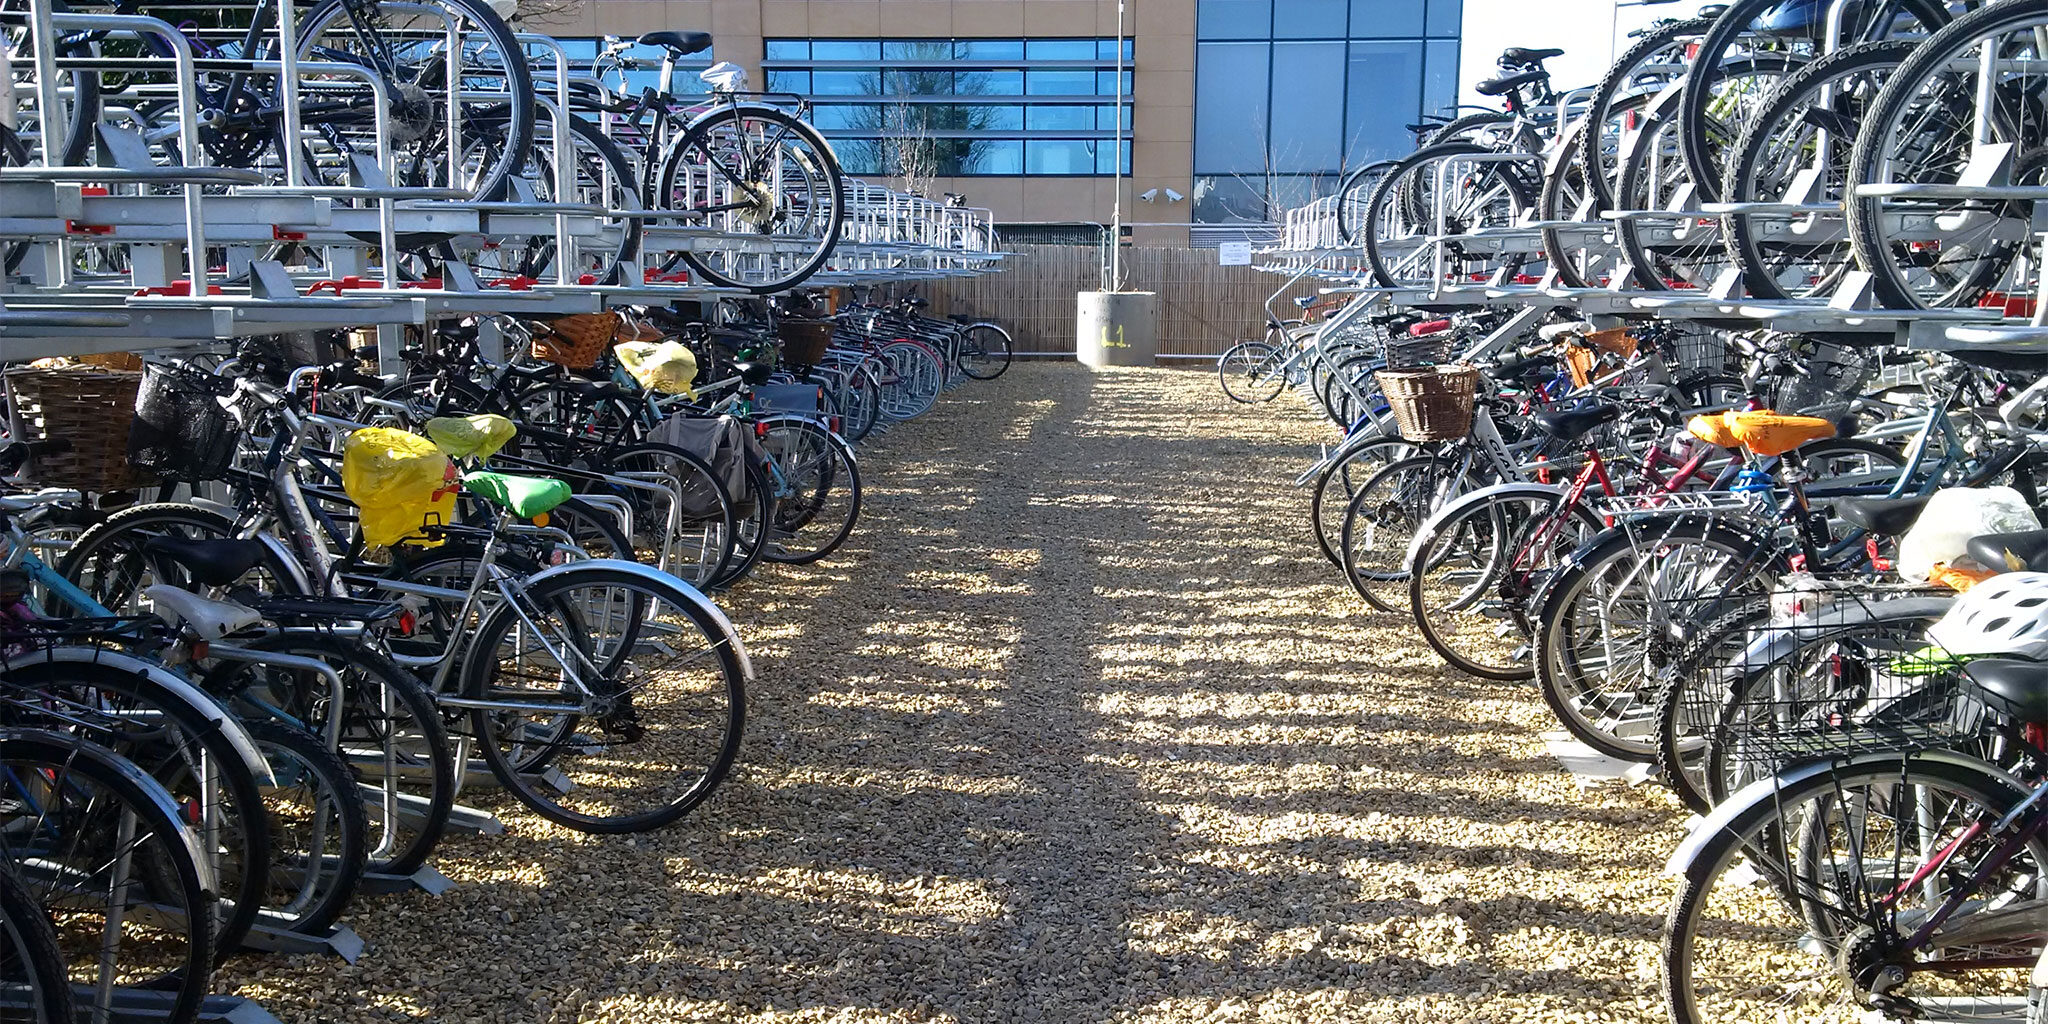 Bellsure had just the solution for cycle storage at Cambridge Railway Station